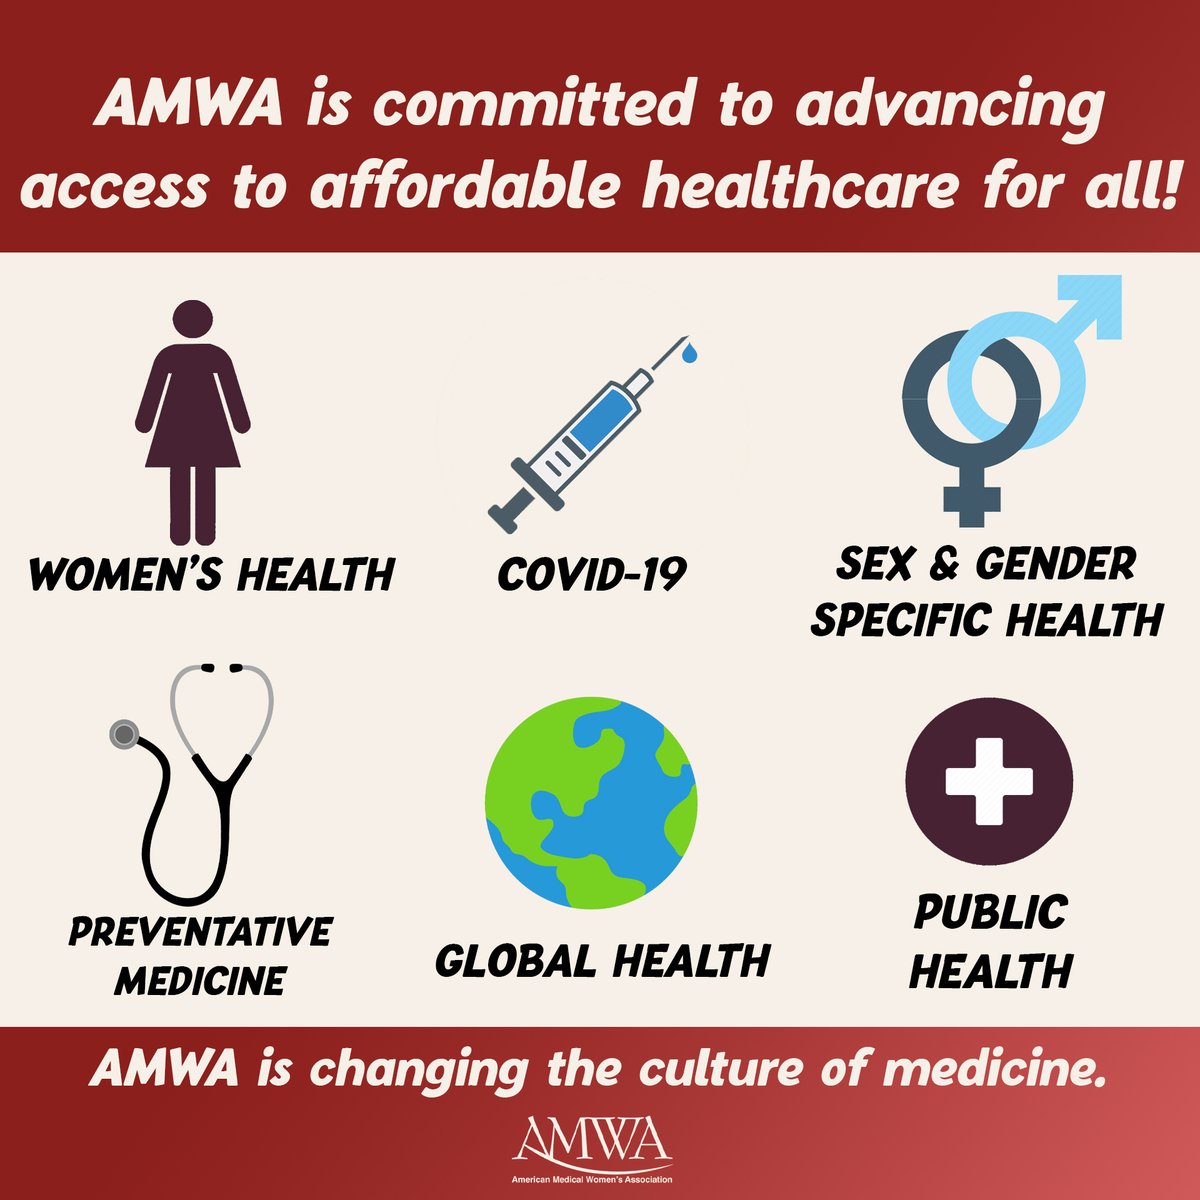 From women’s health to sex and gender-specific medicine, AMWA is changing the culture of medicine. Learn more at: bit.ly/AMWAHEALTHCARE

#doctors #mentalhealthresources #womenshealth #covid19 #womenphysicians #preventativemedicine #lifestylemedicine #publichealth #globalhealth